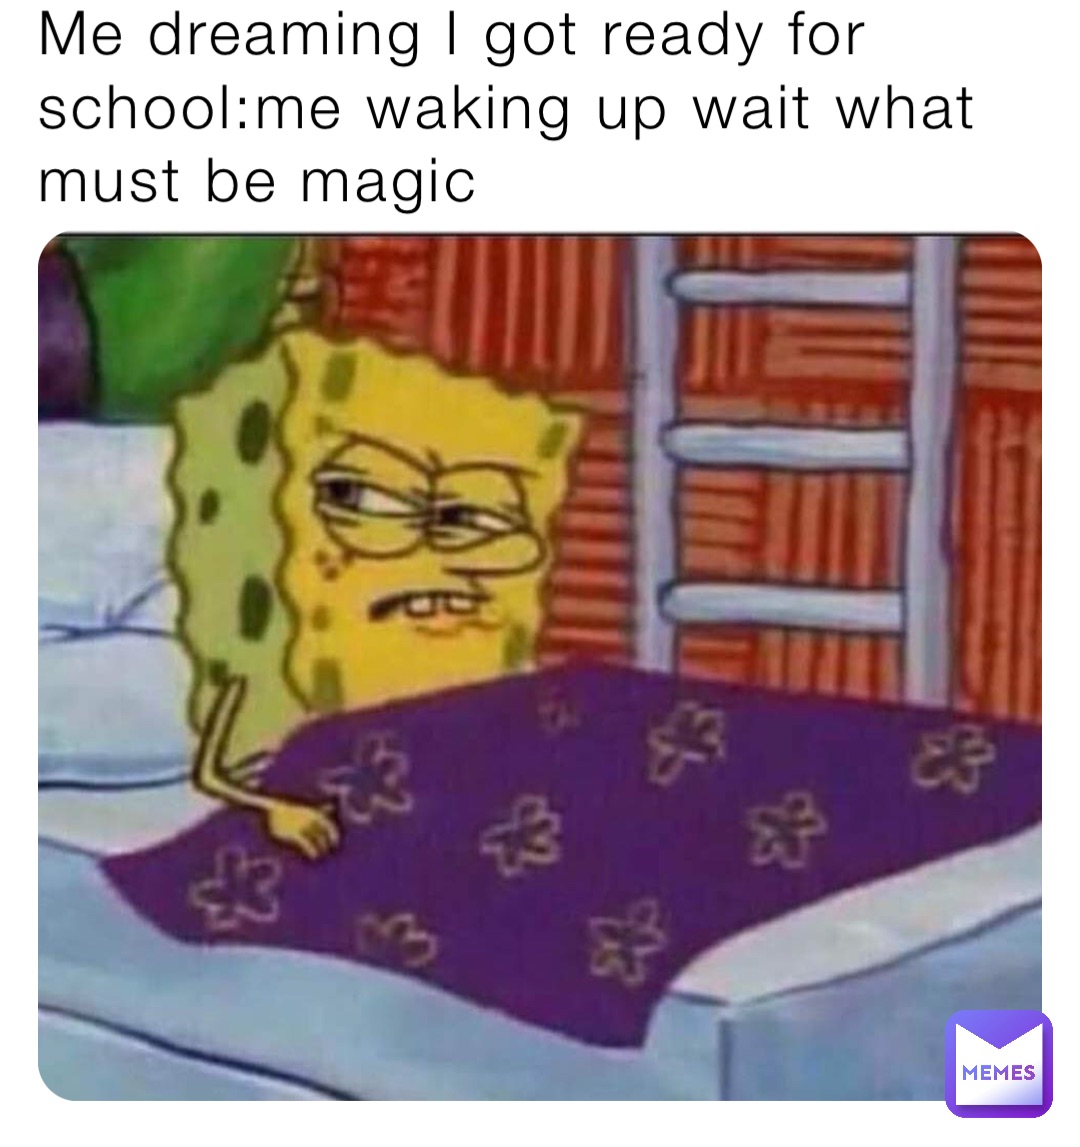 Me dreaming I got ready for school:me waking up wait what must be magic